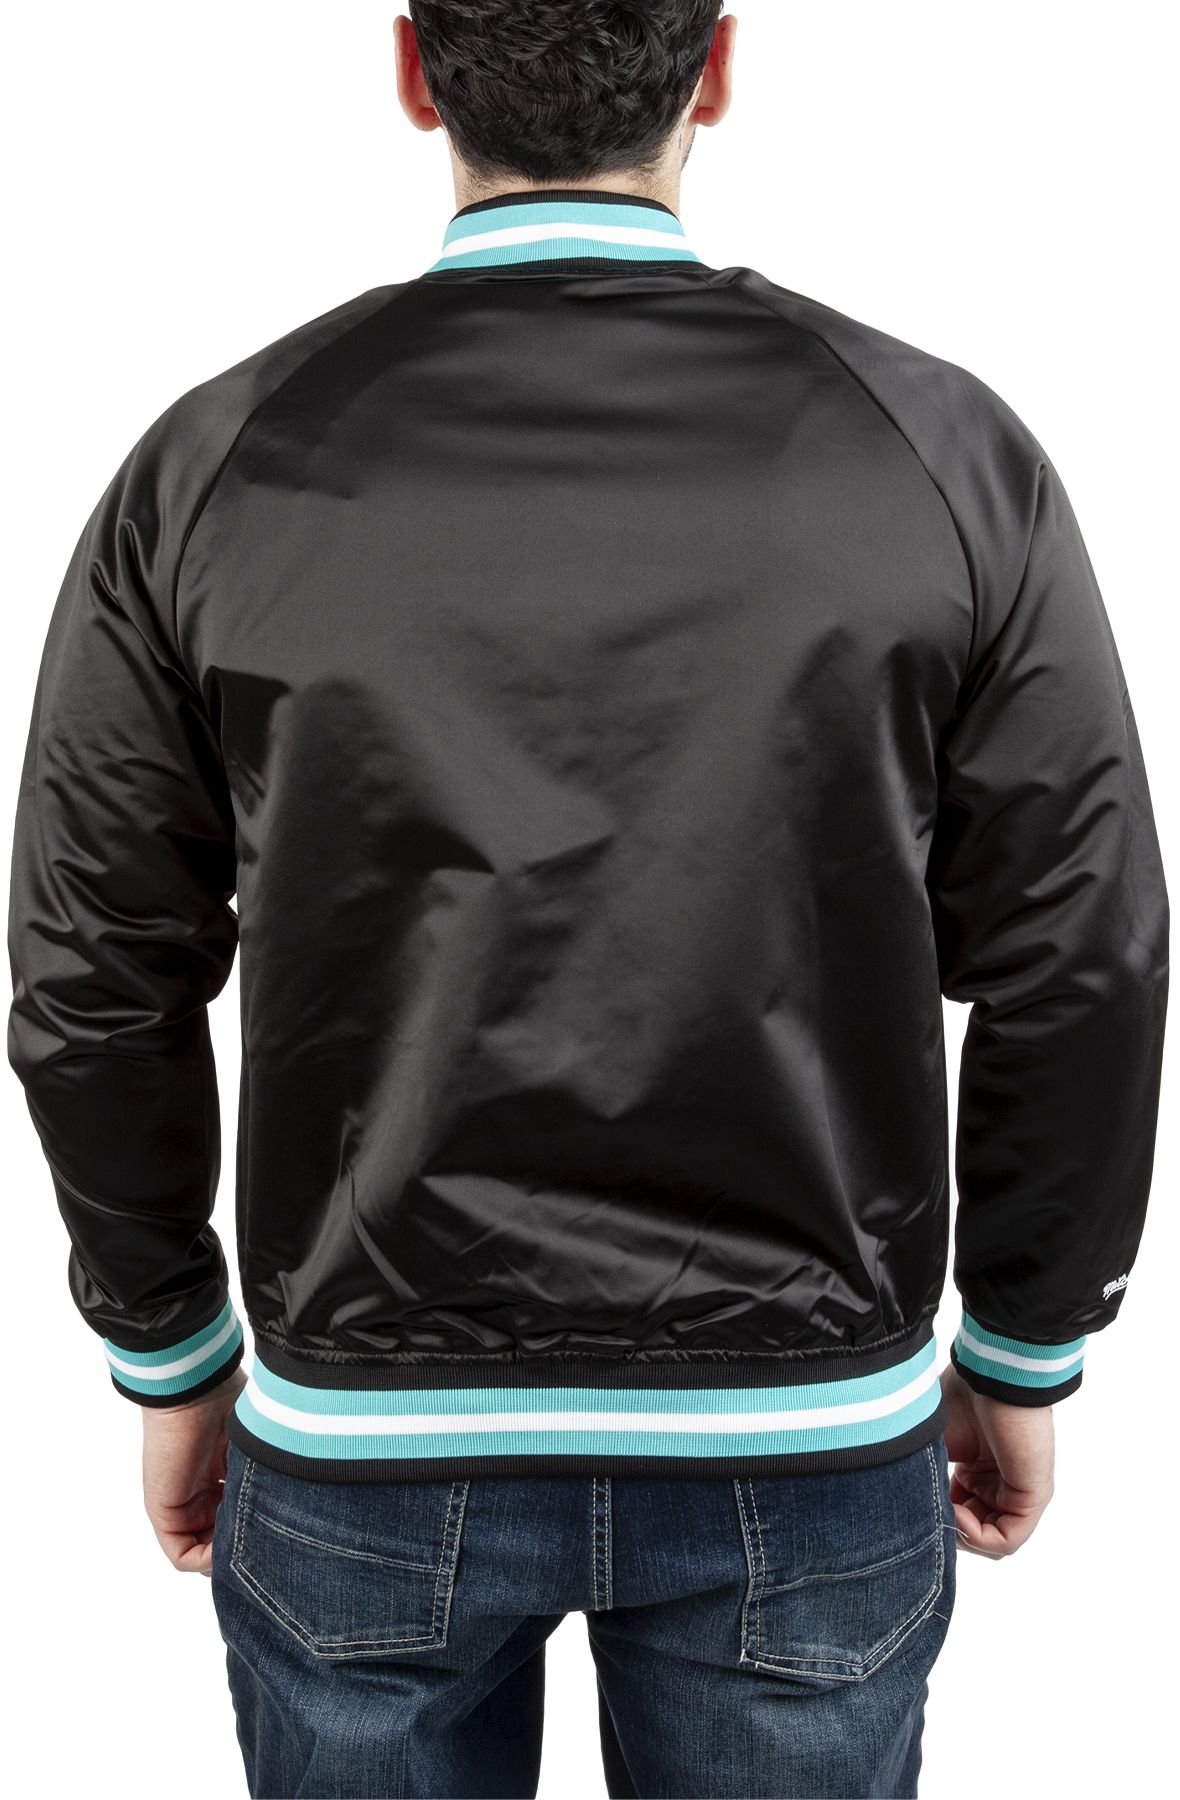 Mitchell & Ness Mens NBA Vancouver Grizzlies Double Clutch Lightweight  Satin Jacket OJBF3397-VGRYYPPPGRTL Grey/Teal